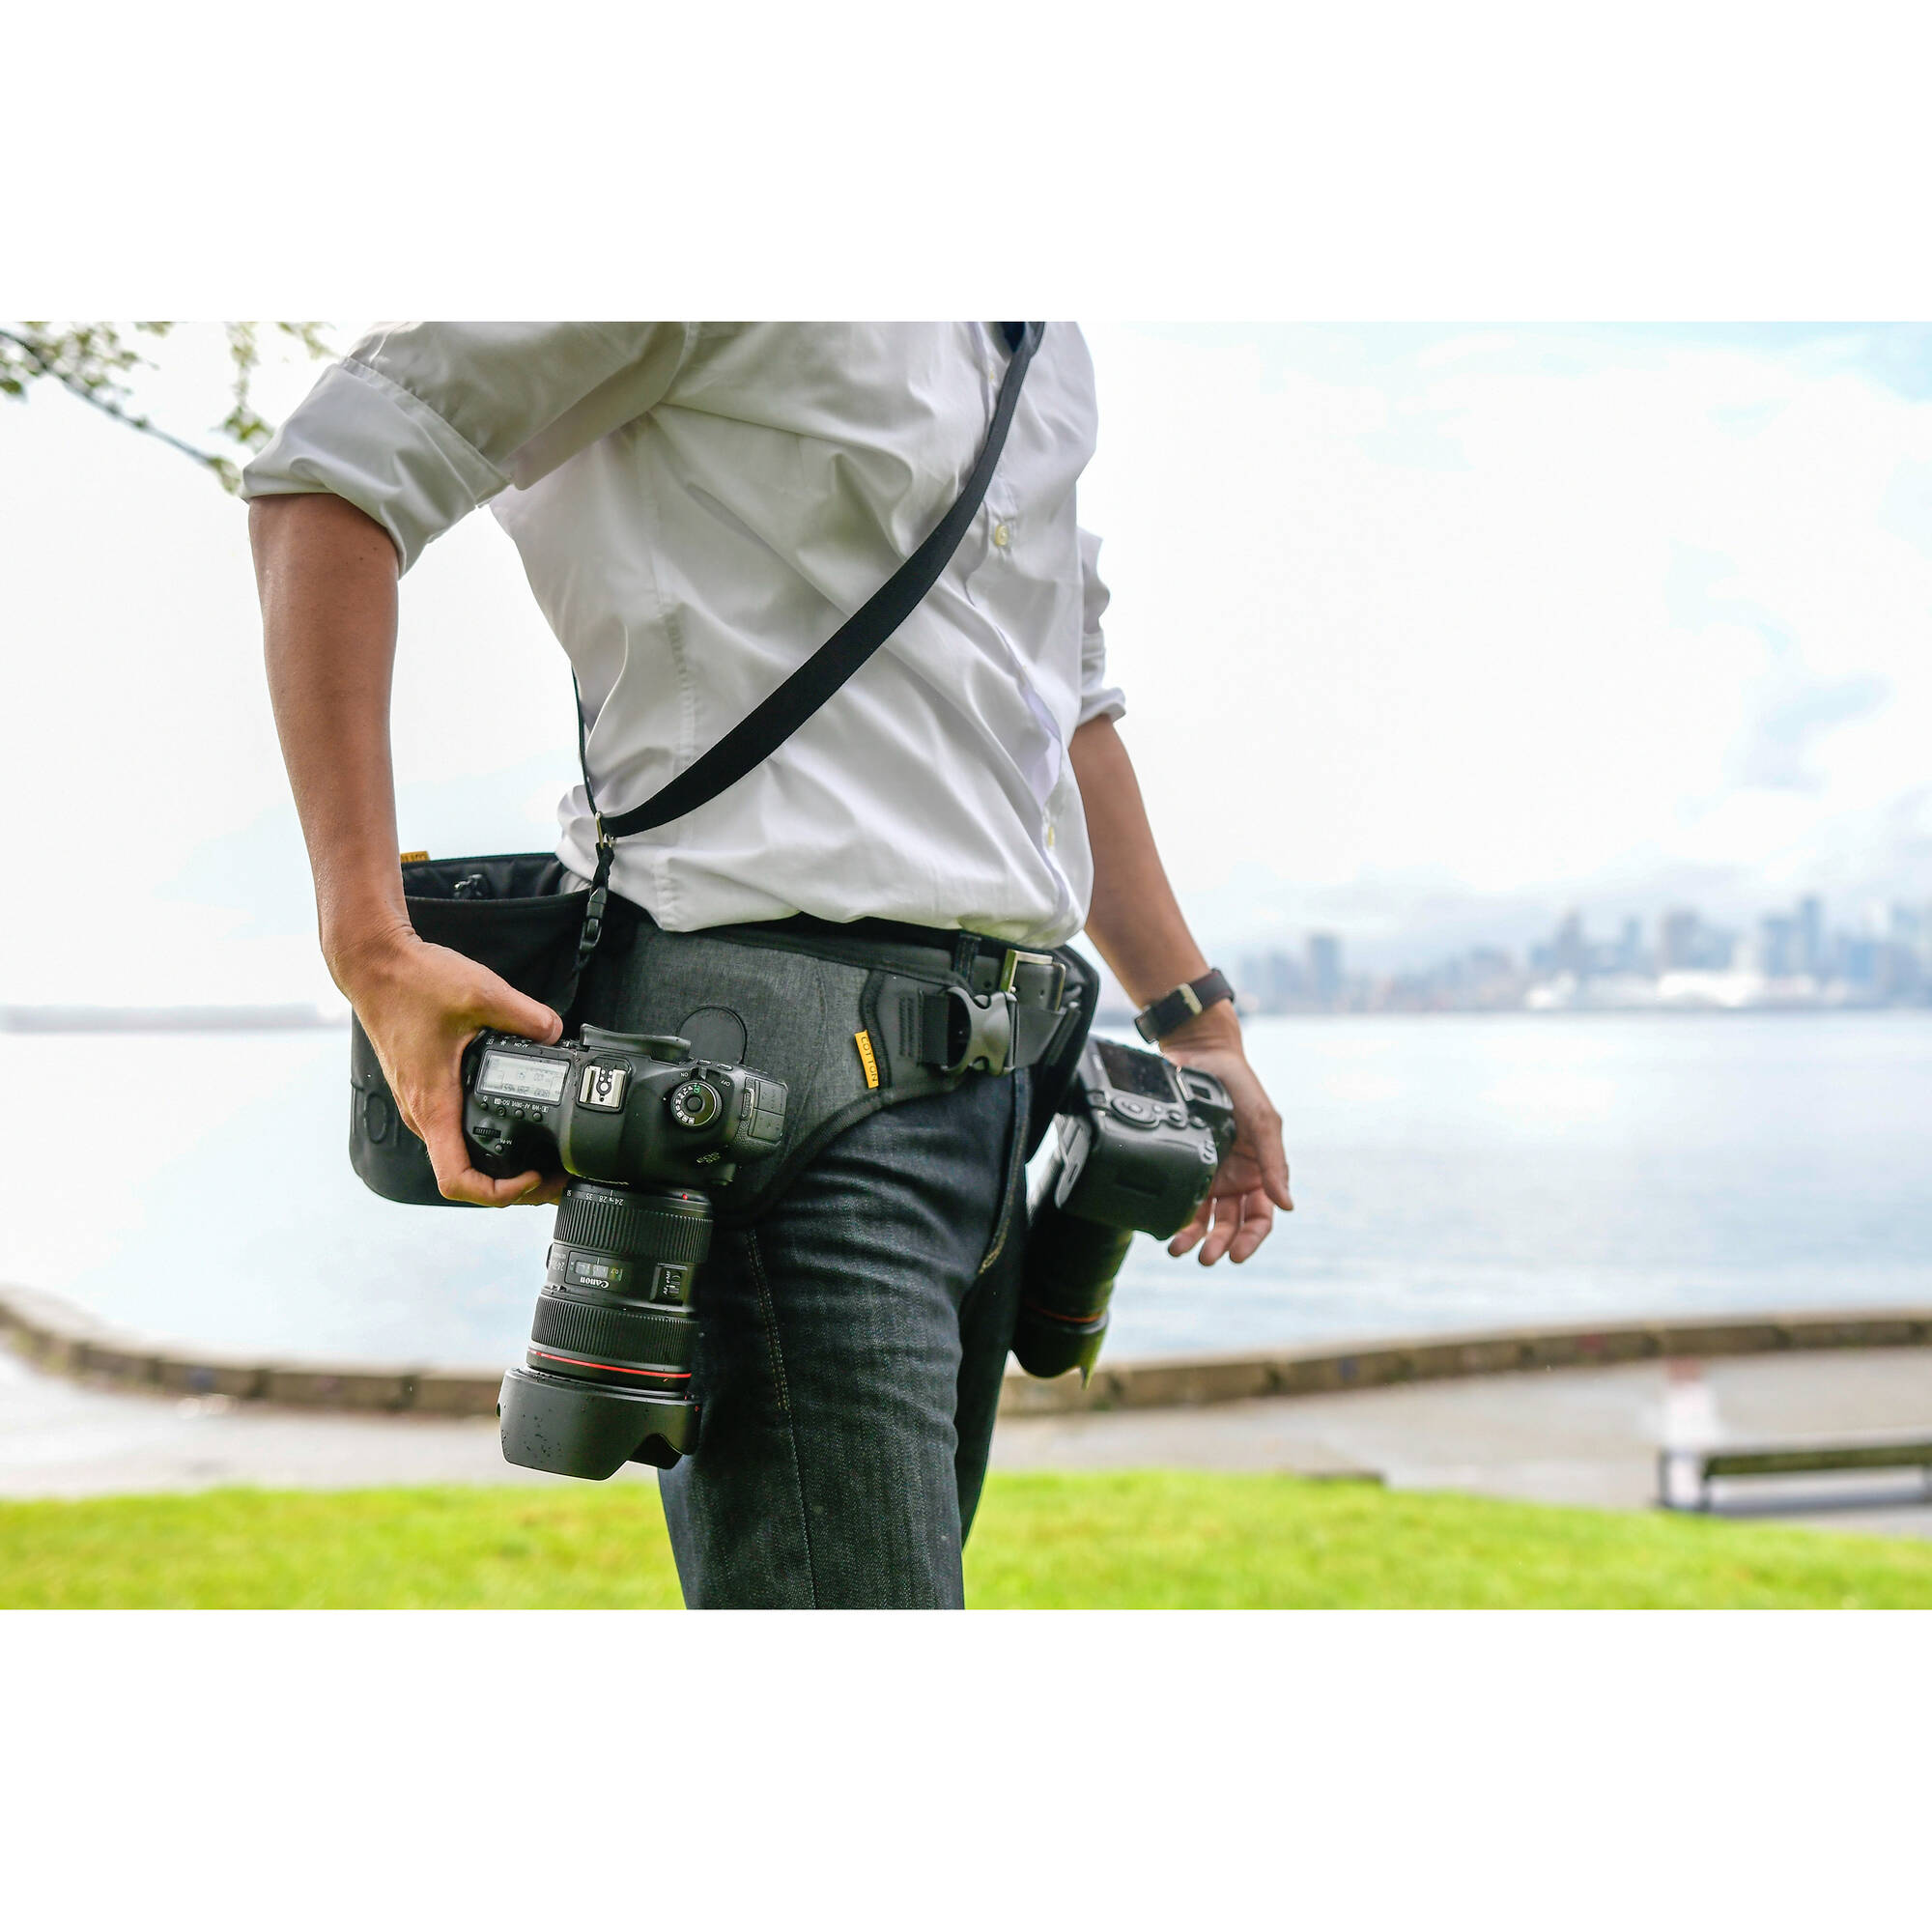 Cotton Carrier SLINGBELT 1-Camera Carrying System with Tether